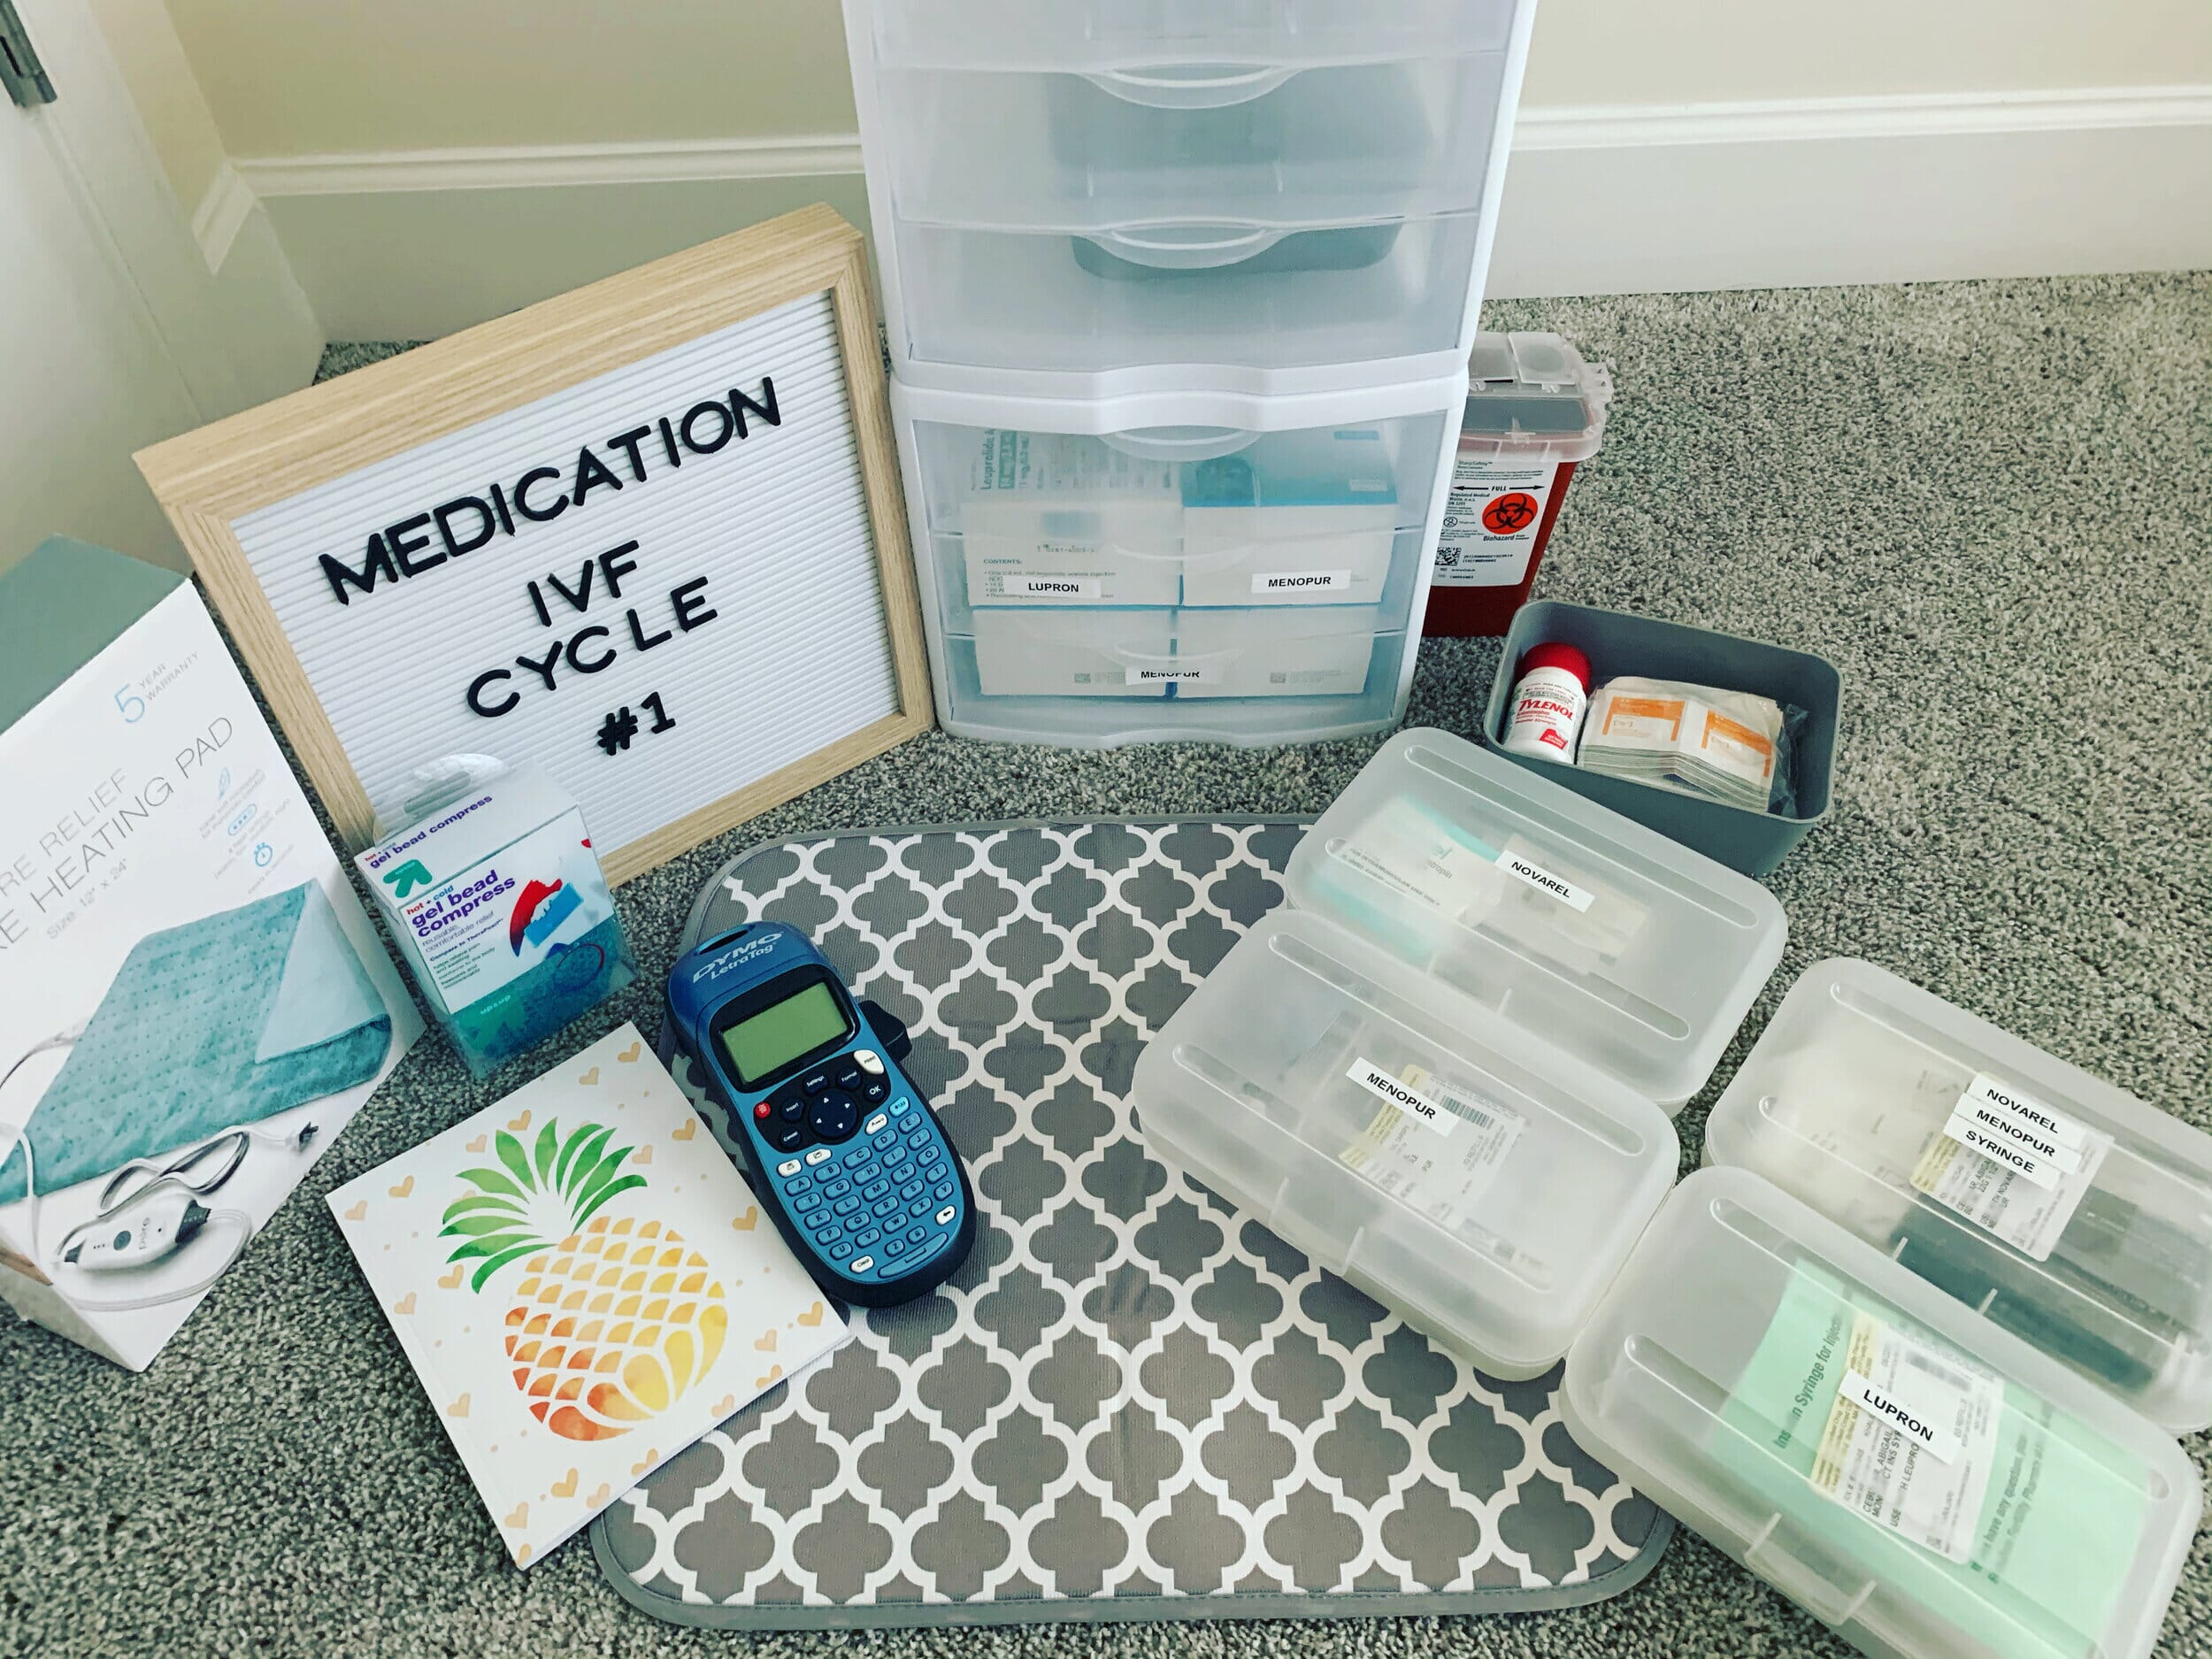 Best Way To Organize/Store Fertility Medications